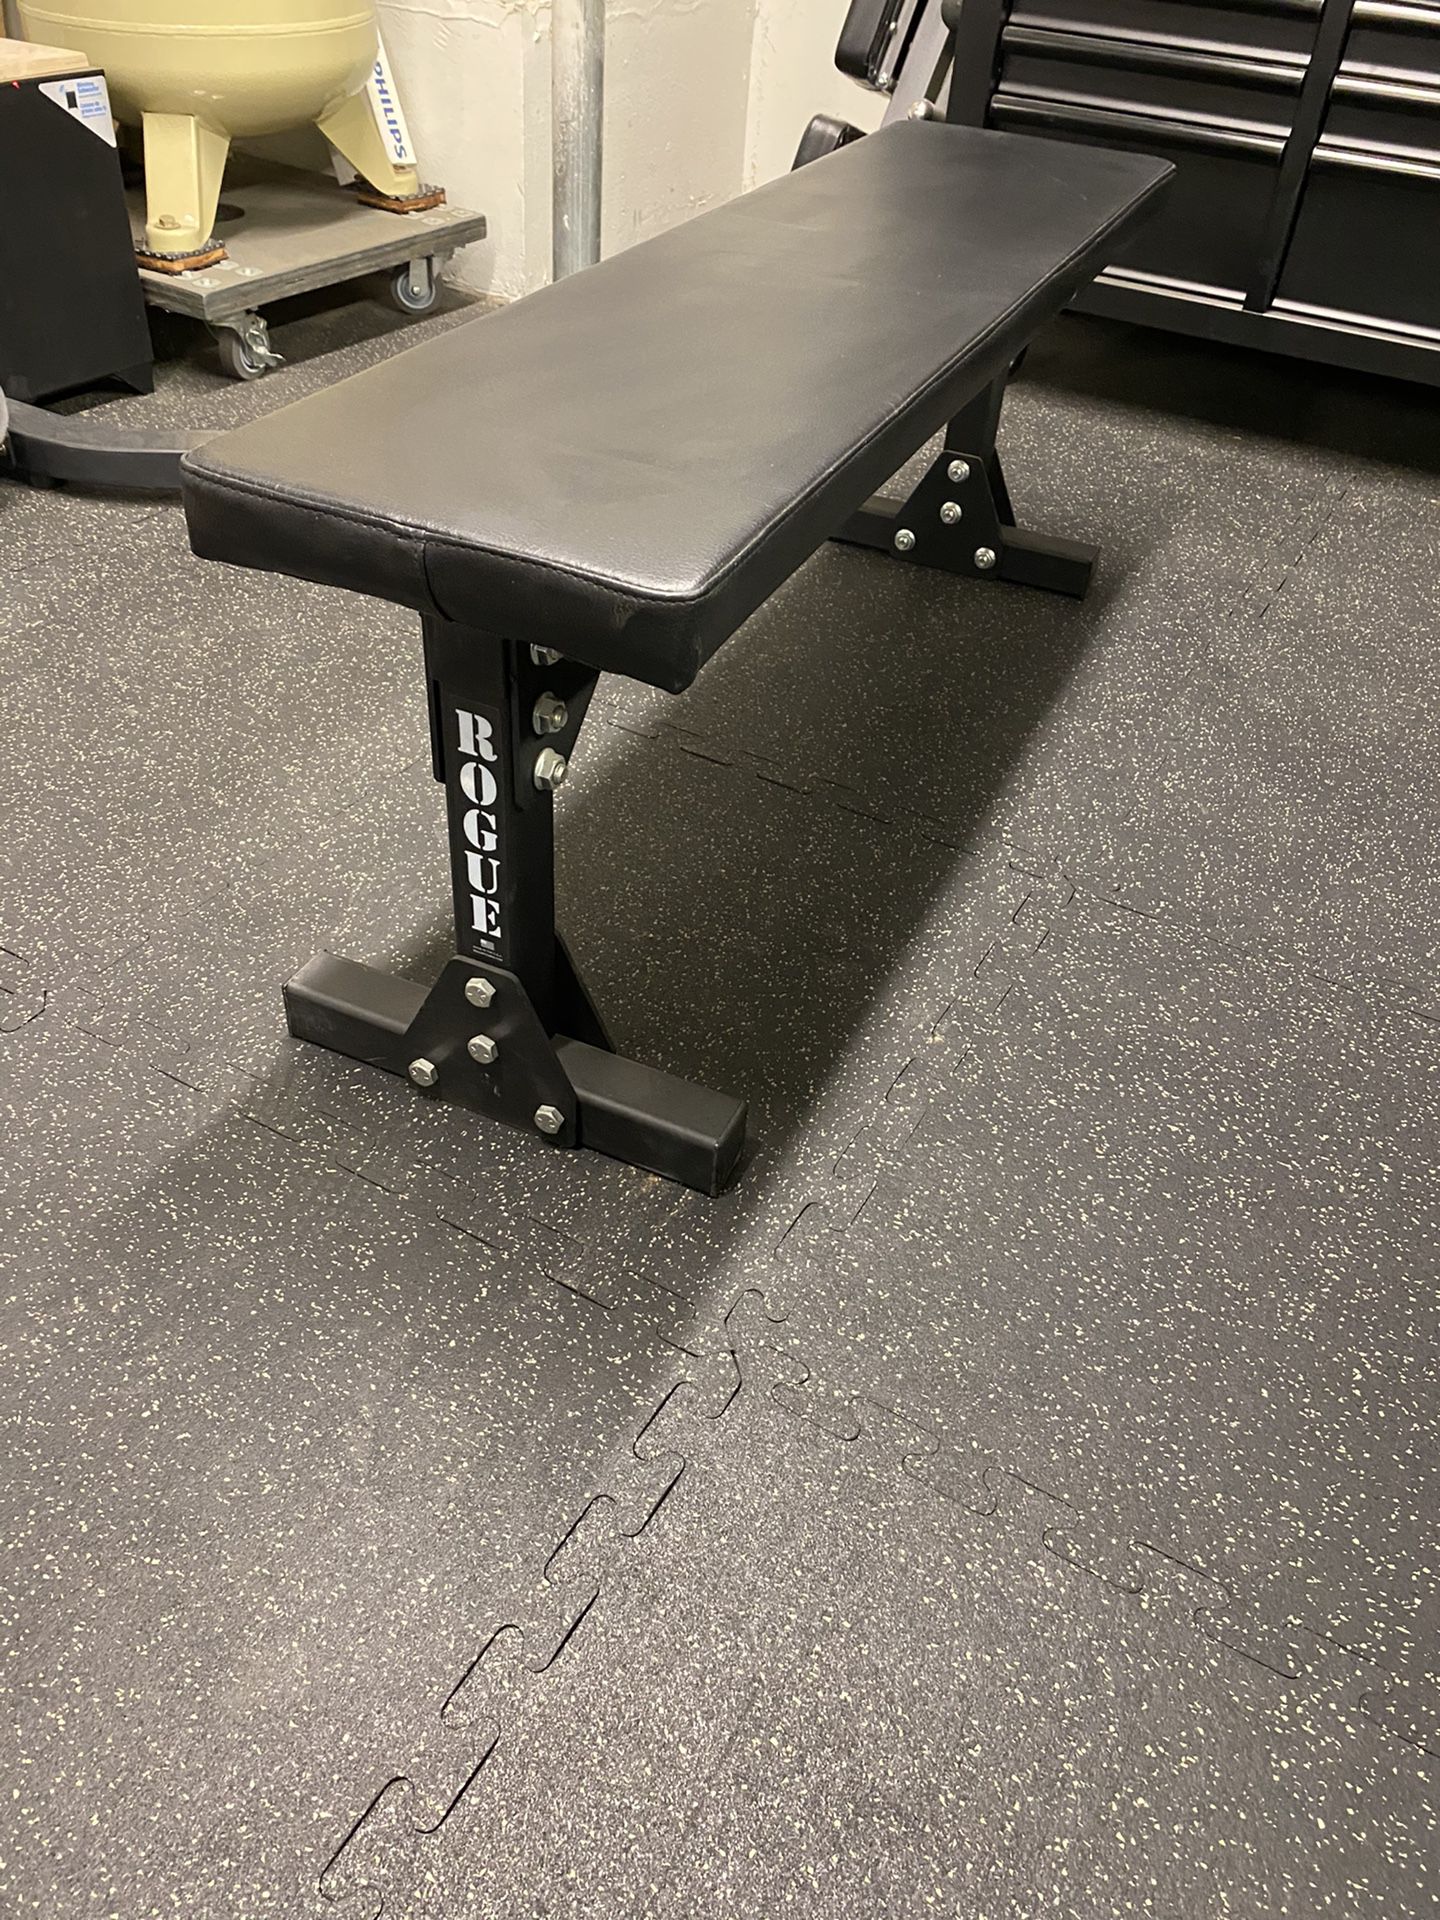 Rogue Fitness flat bench